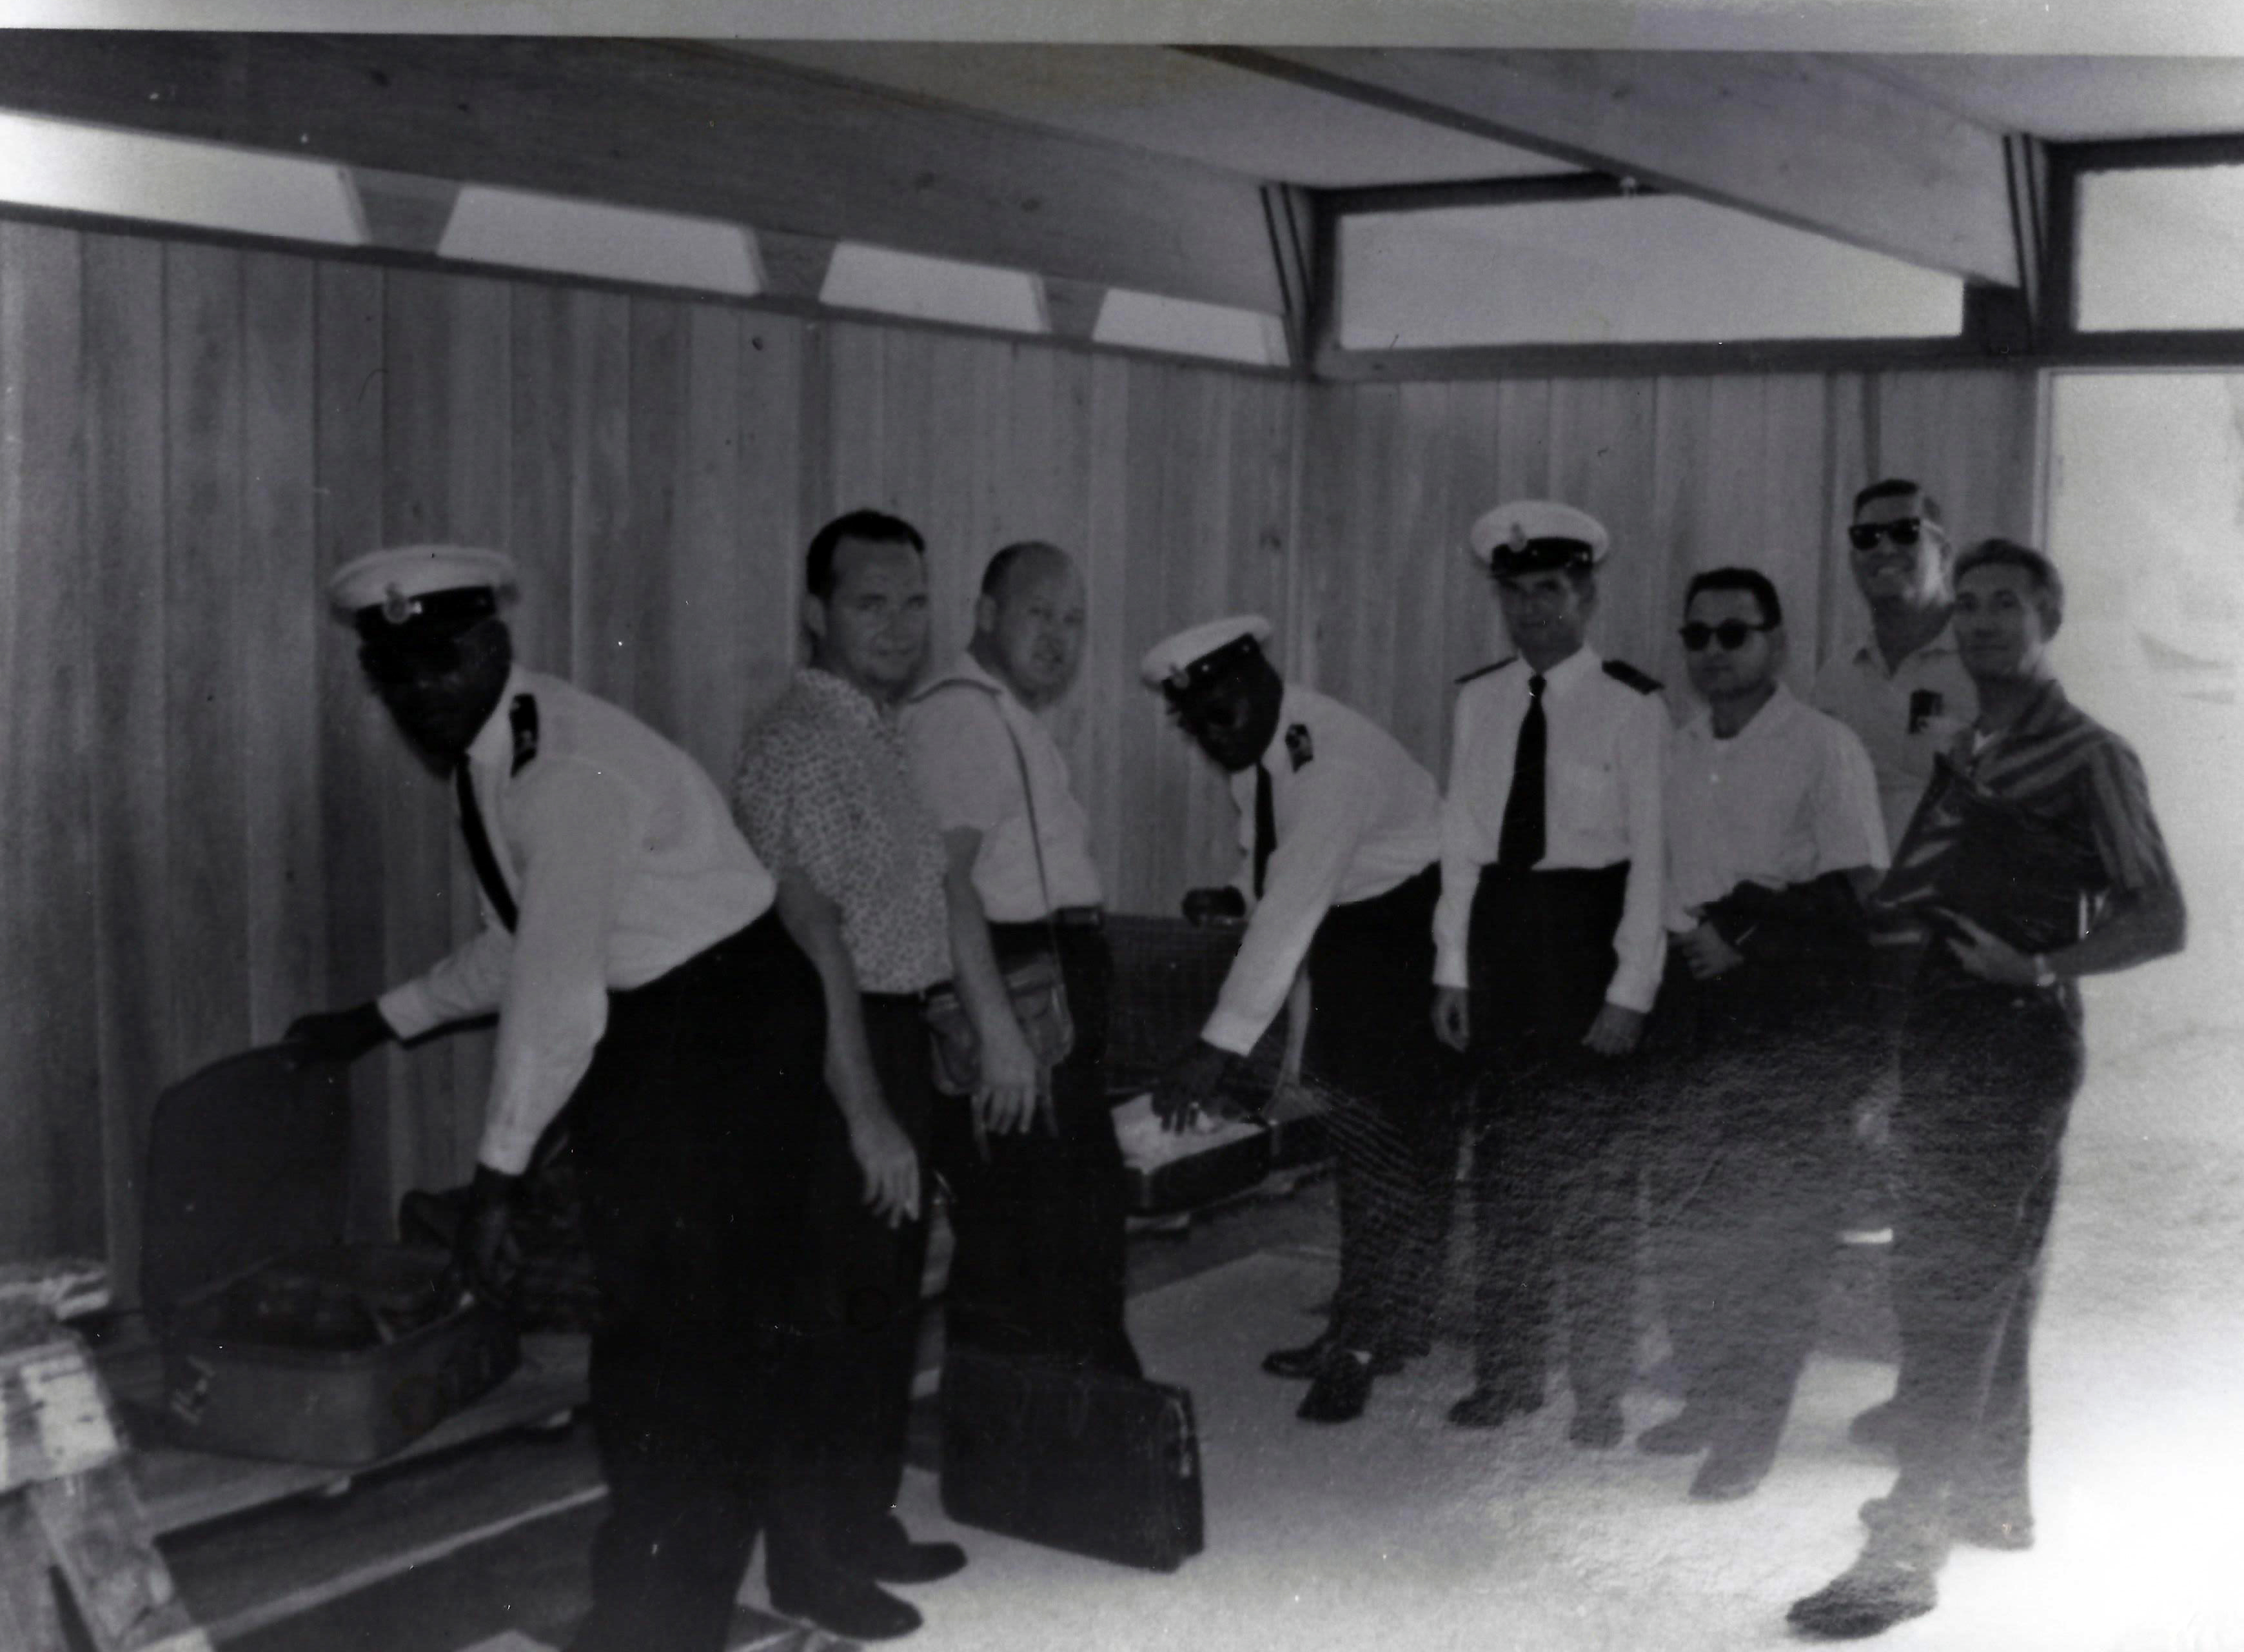 Bahamas Customs inspection at the airport, early 1960's